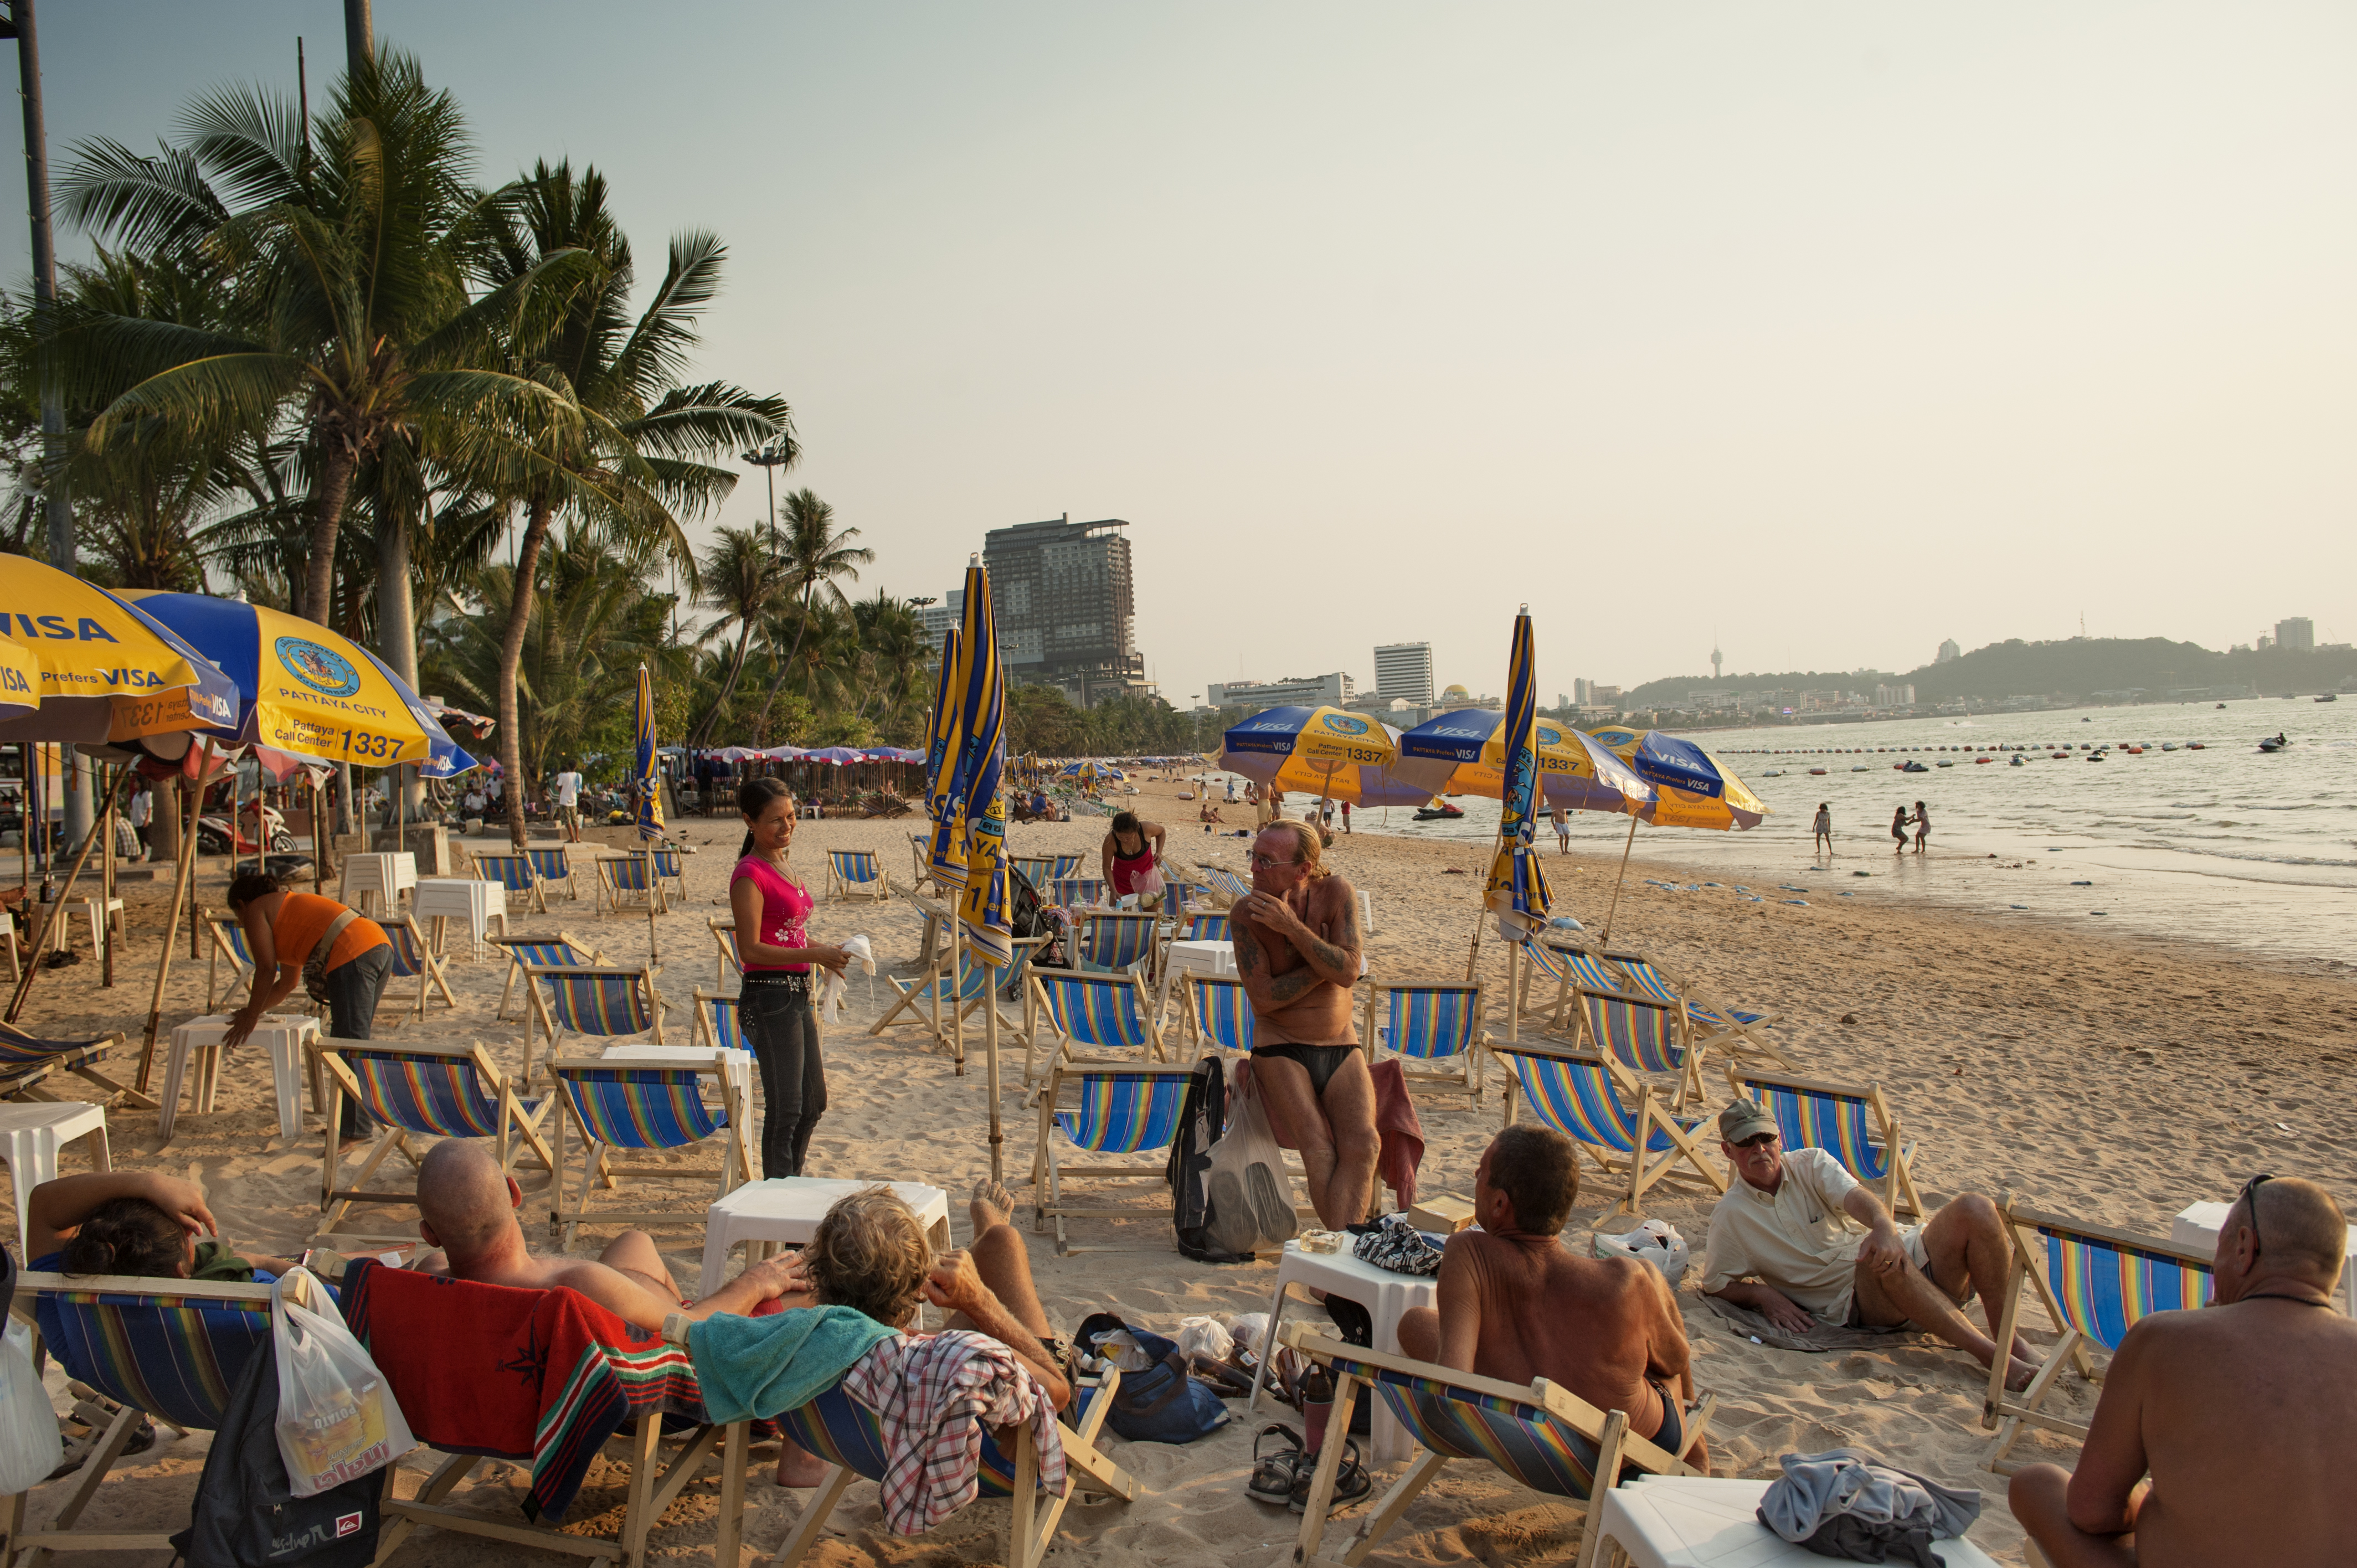 Tourists enjoy the beach at Pattaya in this file photo from 2013. The city remains a popular destination, drawing throngs of travelers throughout the year (Jonas Gratzer—LightRocket/Getty Images)